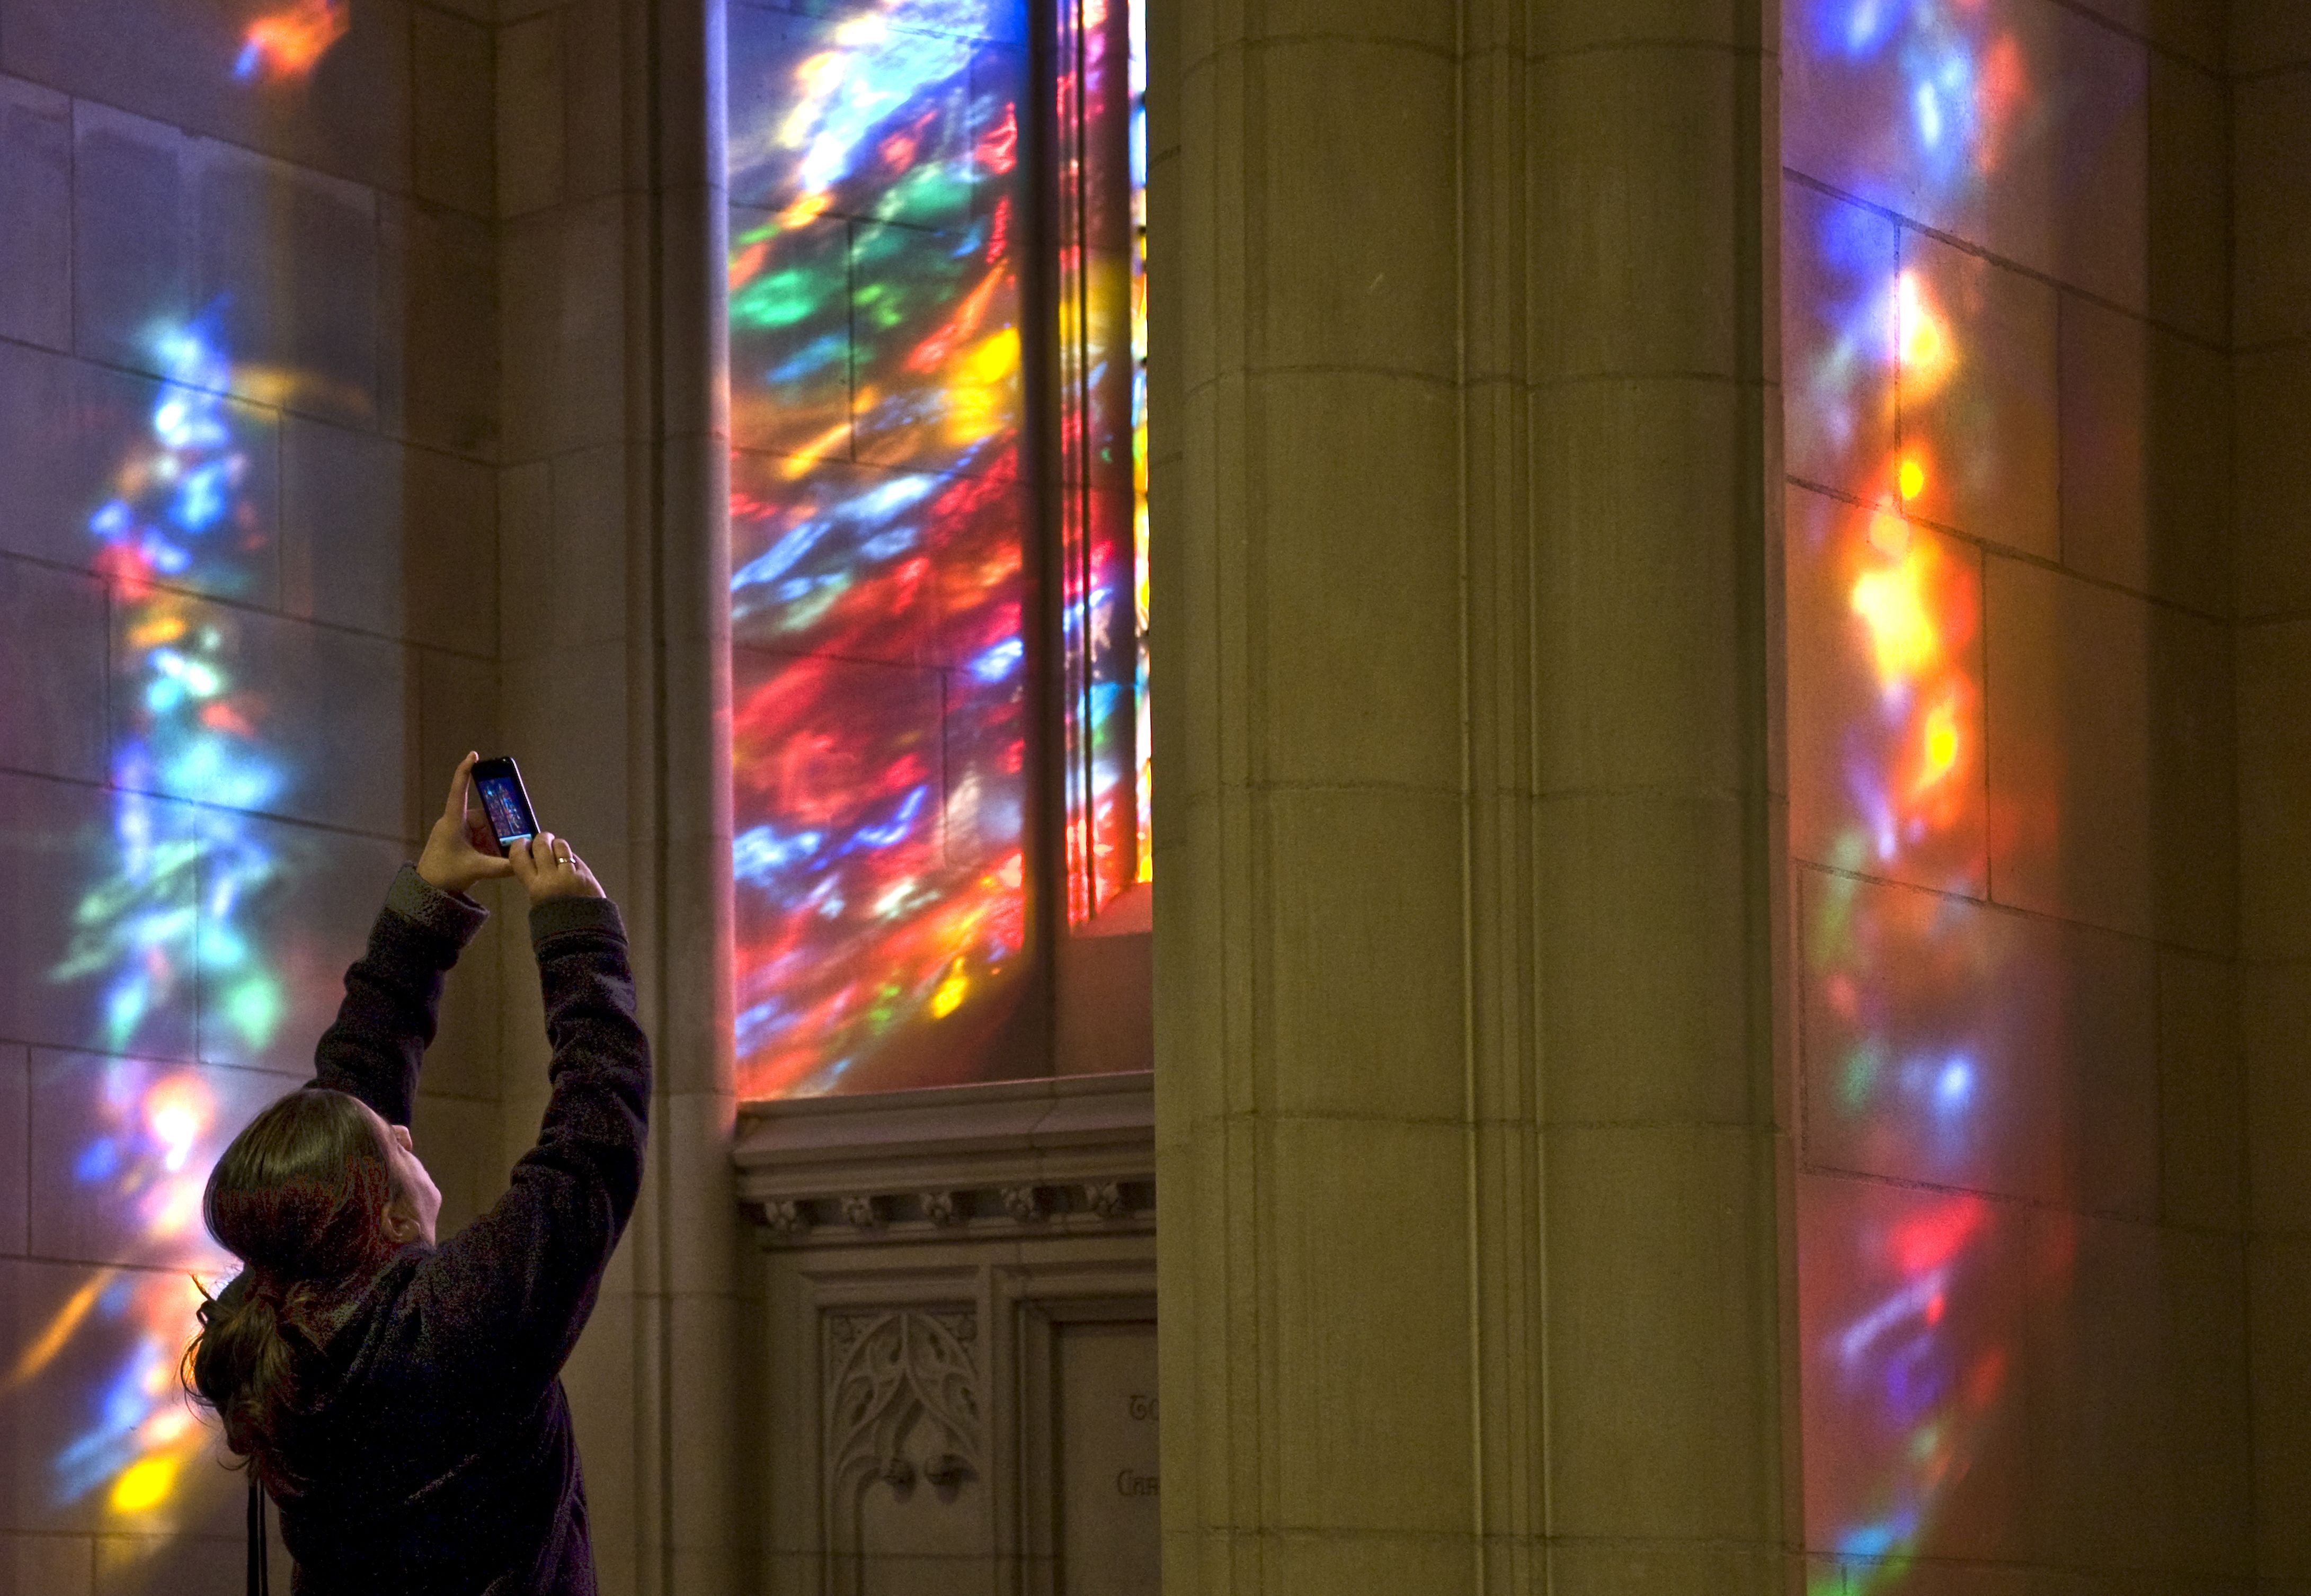 A person takes a picture of the stained glass